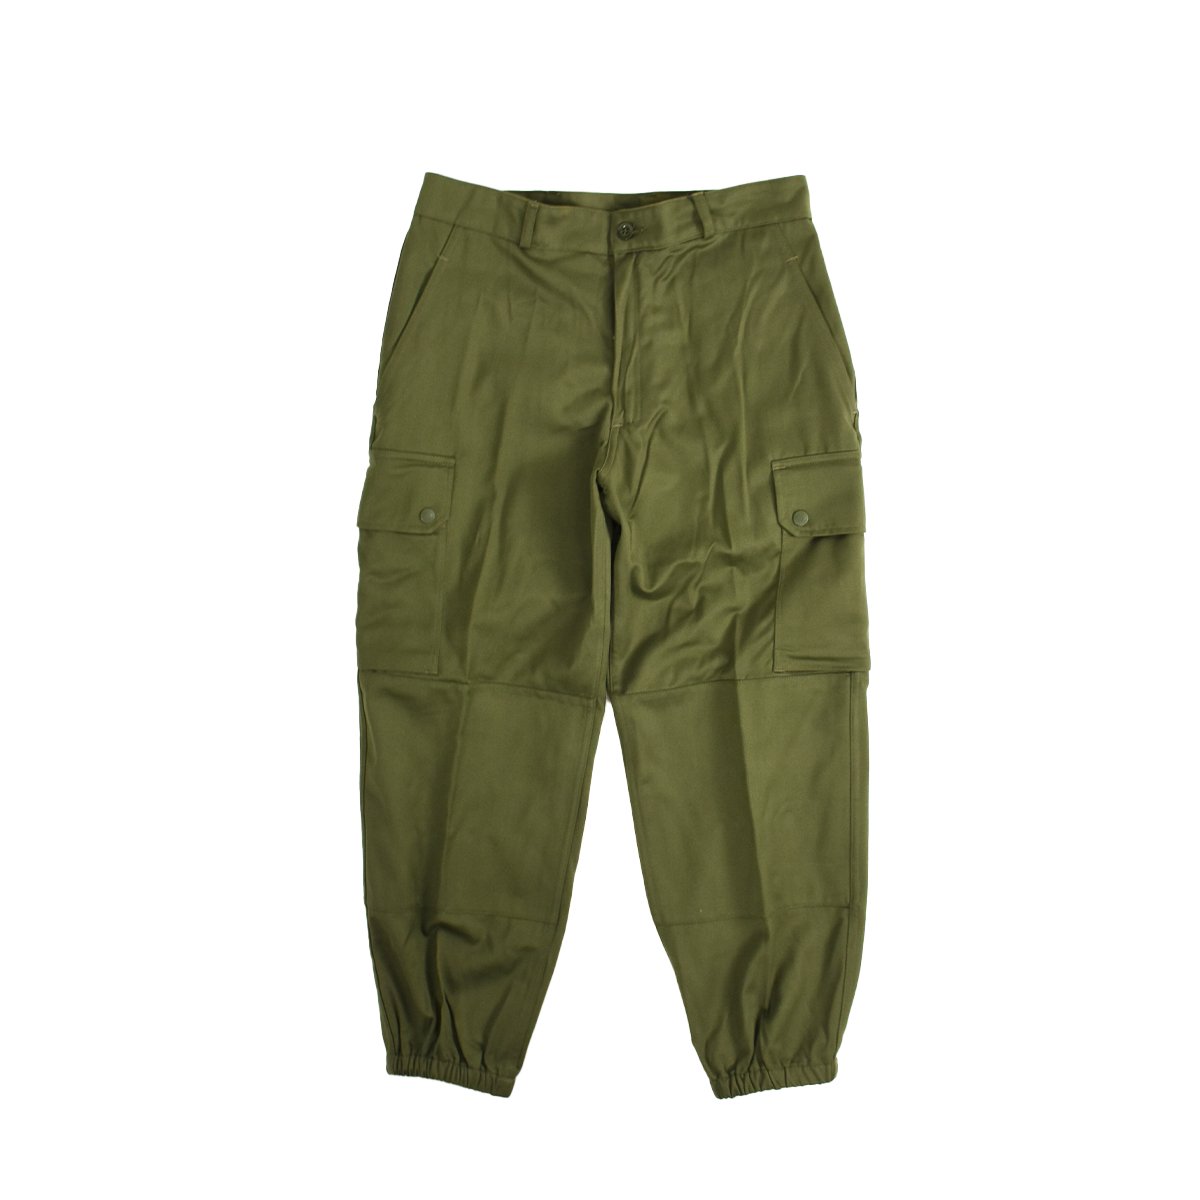 【DEAD STOCK】French Army F2 Cargo Pants (Olive)
                          </a>
            <span class=